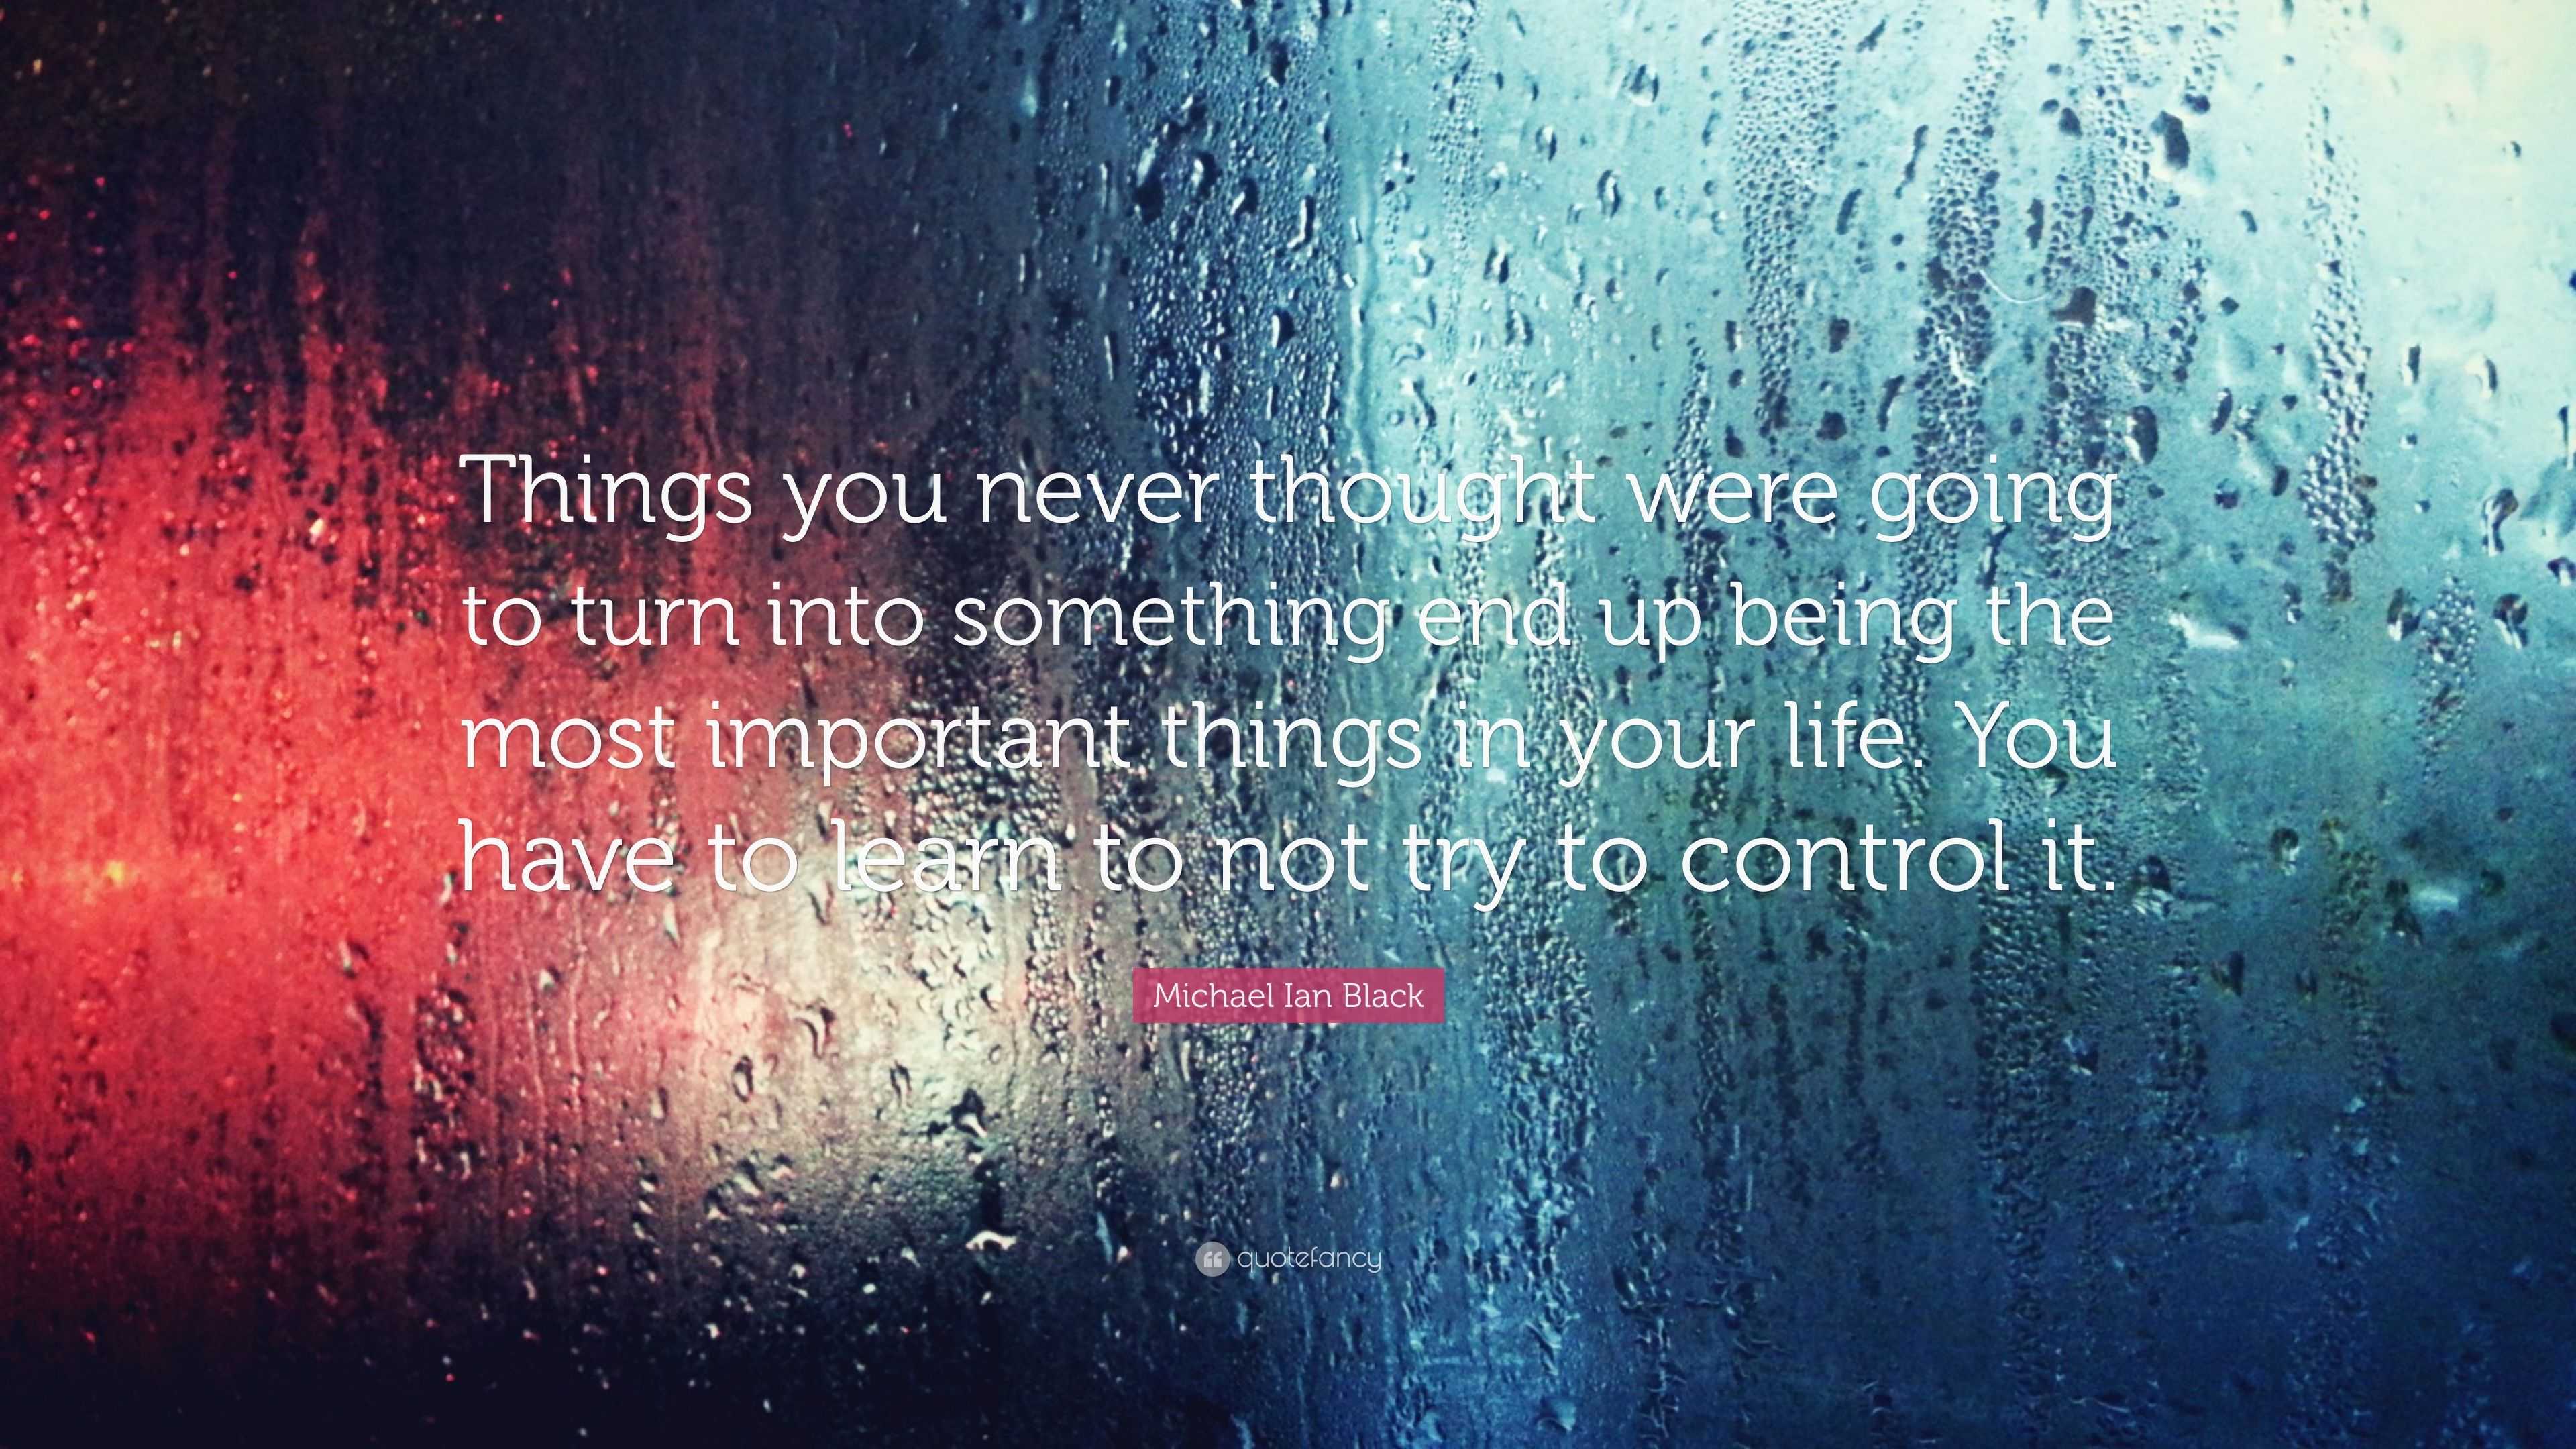 Michael Ian Black Quote: “Things you never thought were going to turn ...